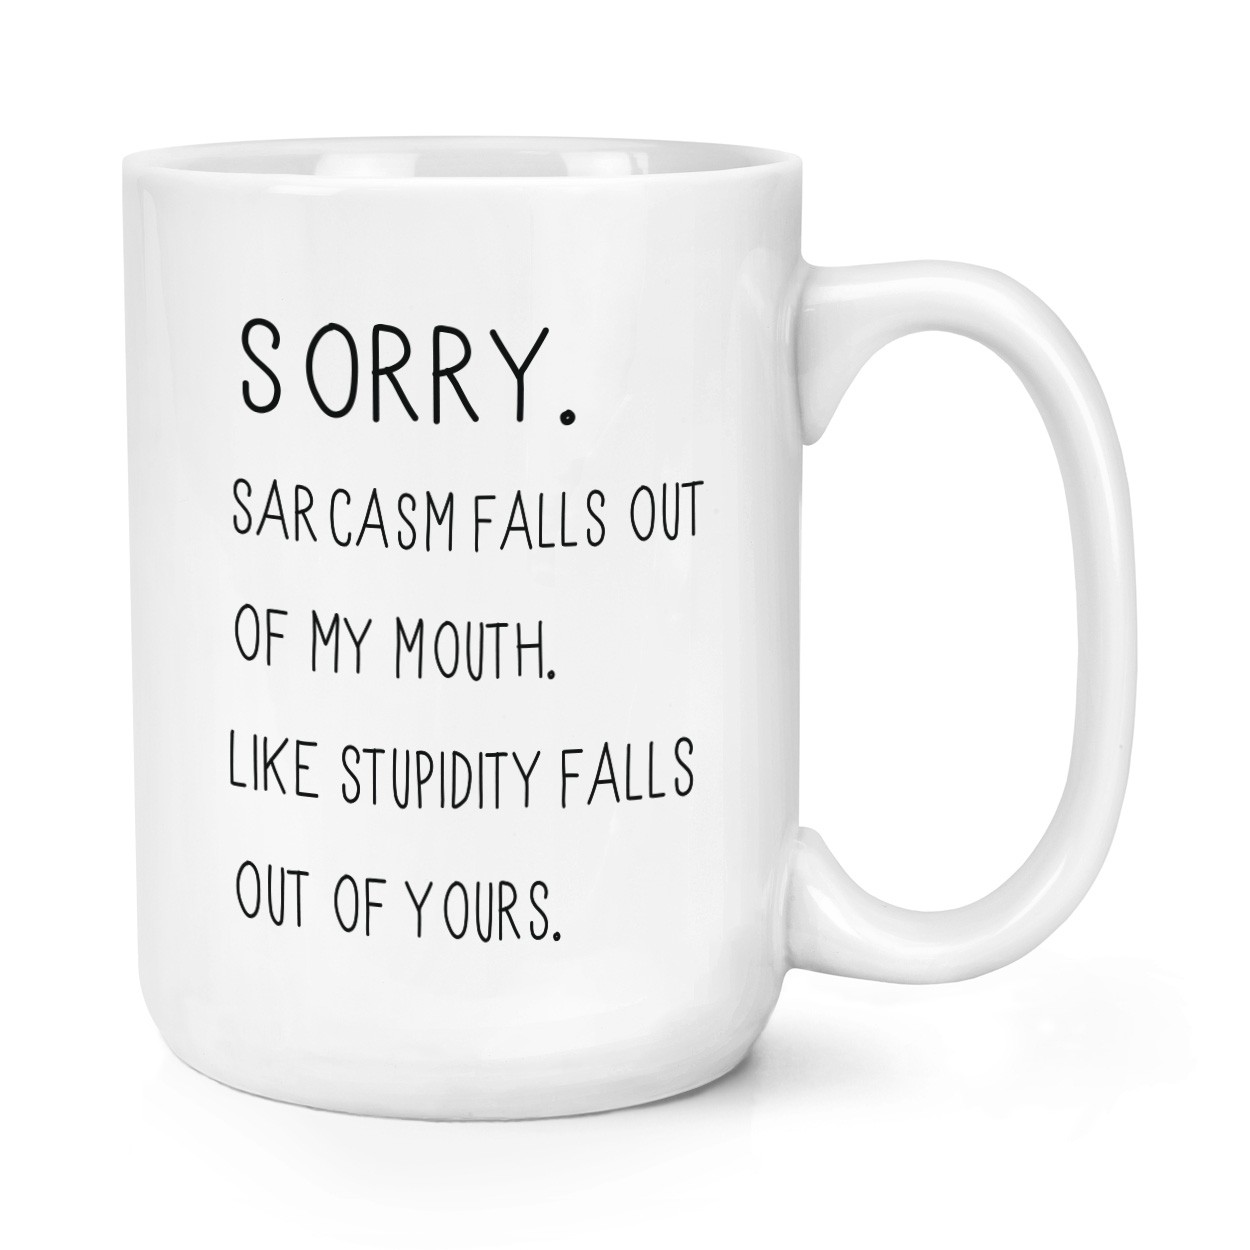 Sorry Sarcasm Falls Out Of My Mouth 15oz Large Mug Cup